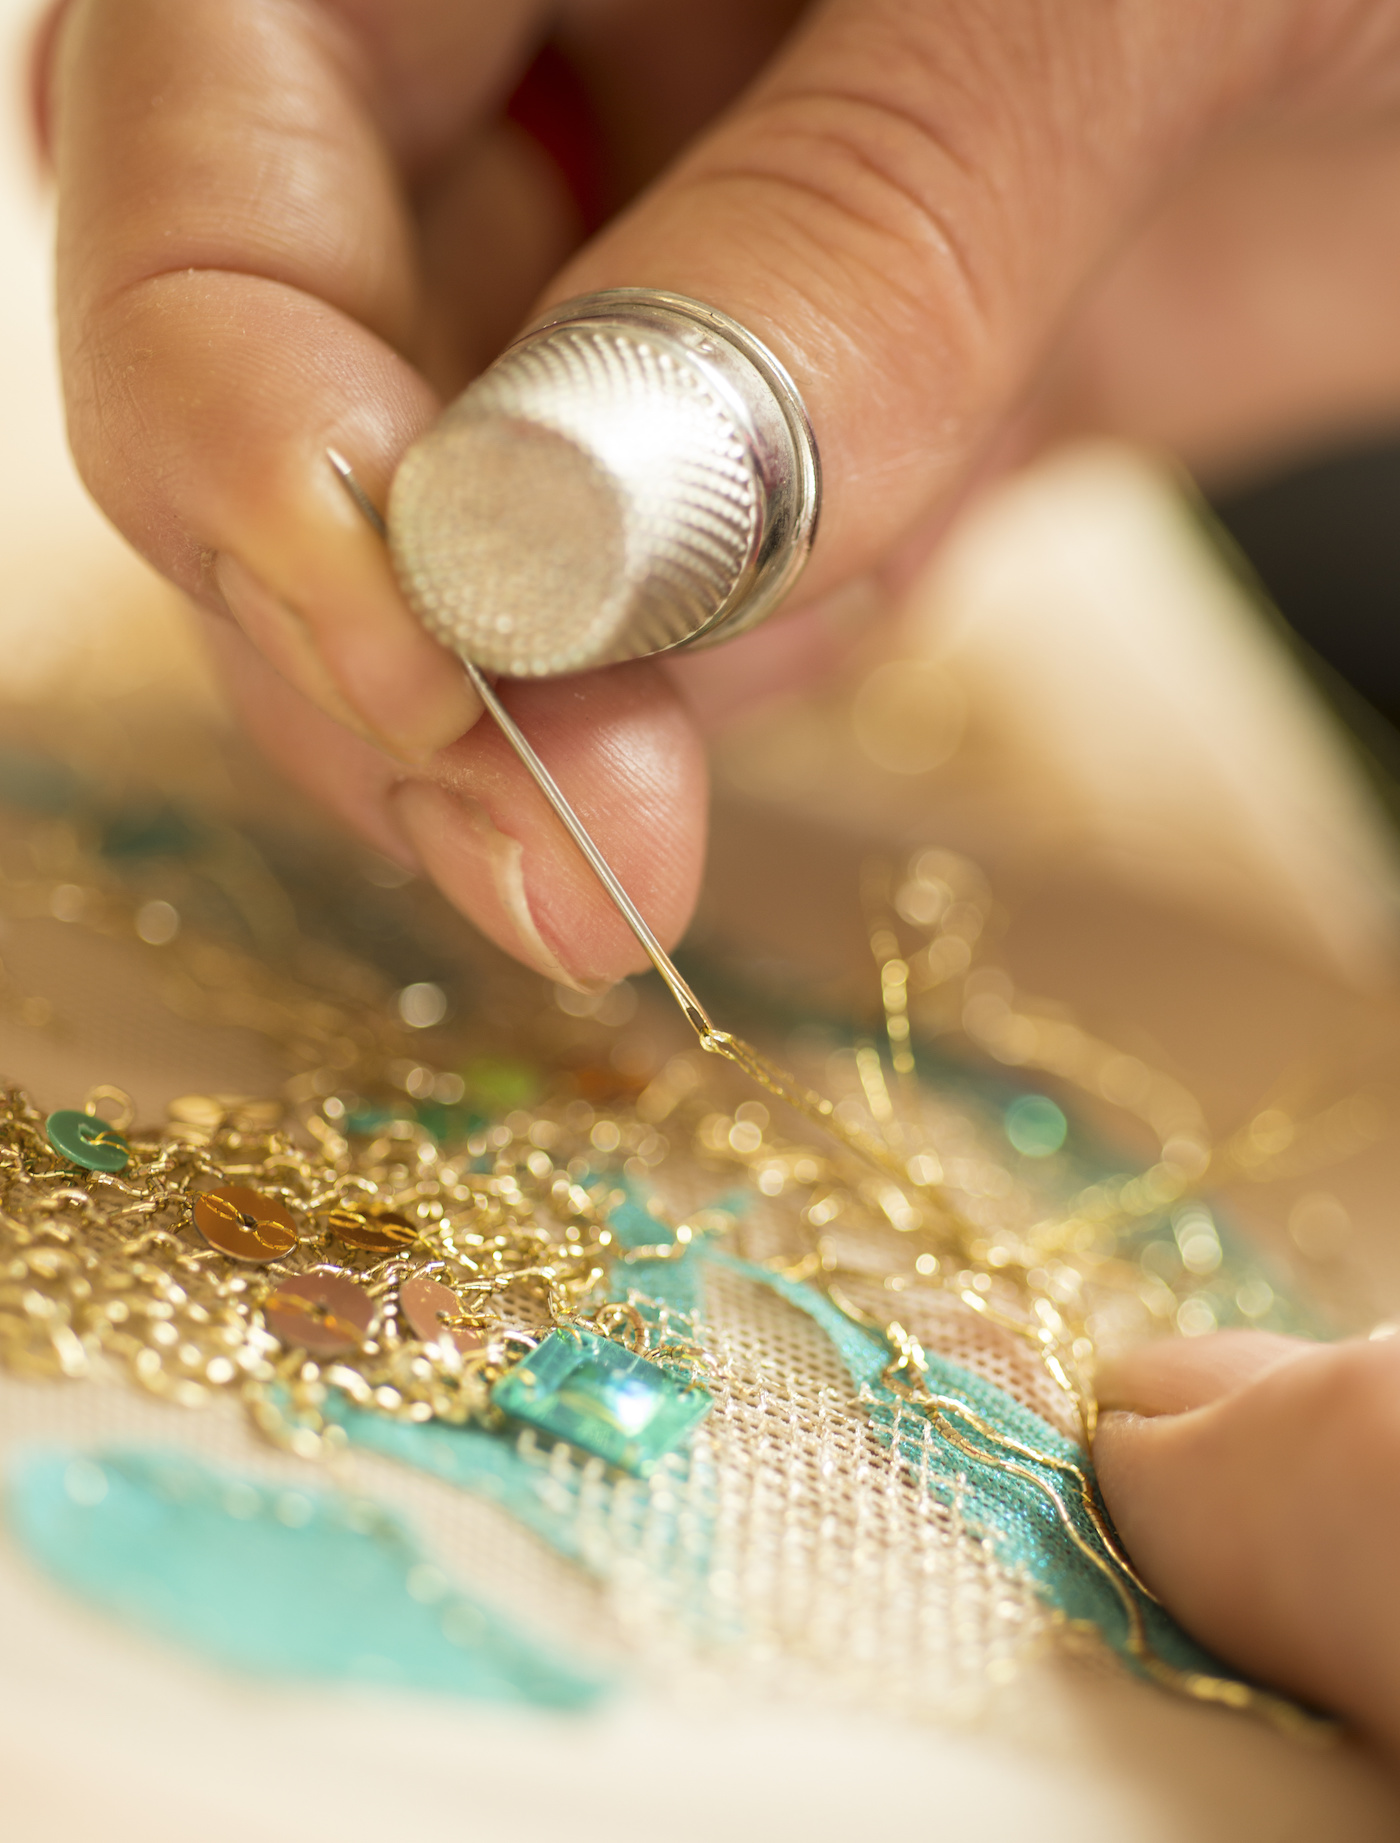 Hands and thimble doing embroidery with gold thread